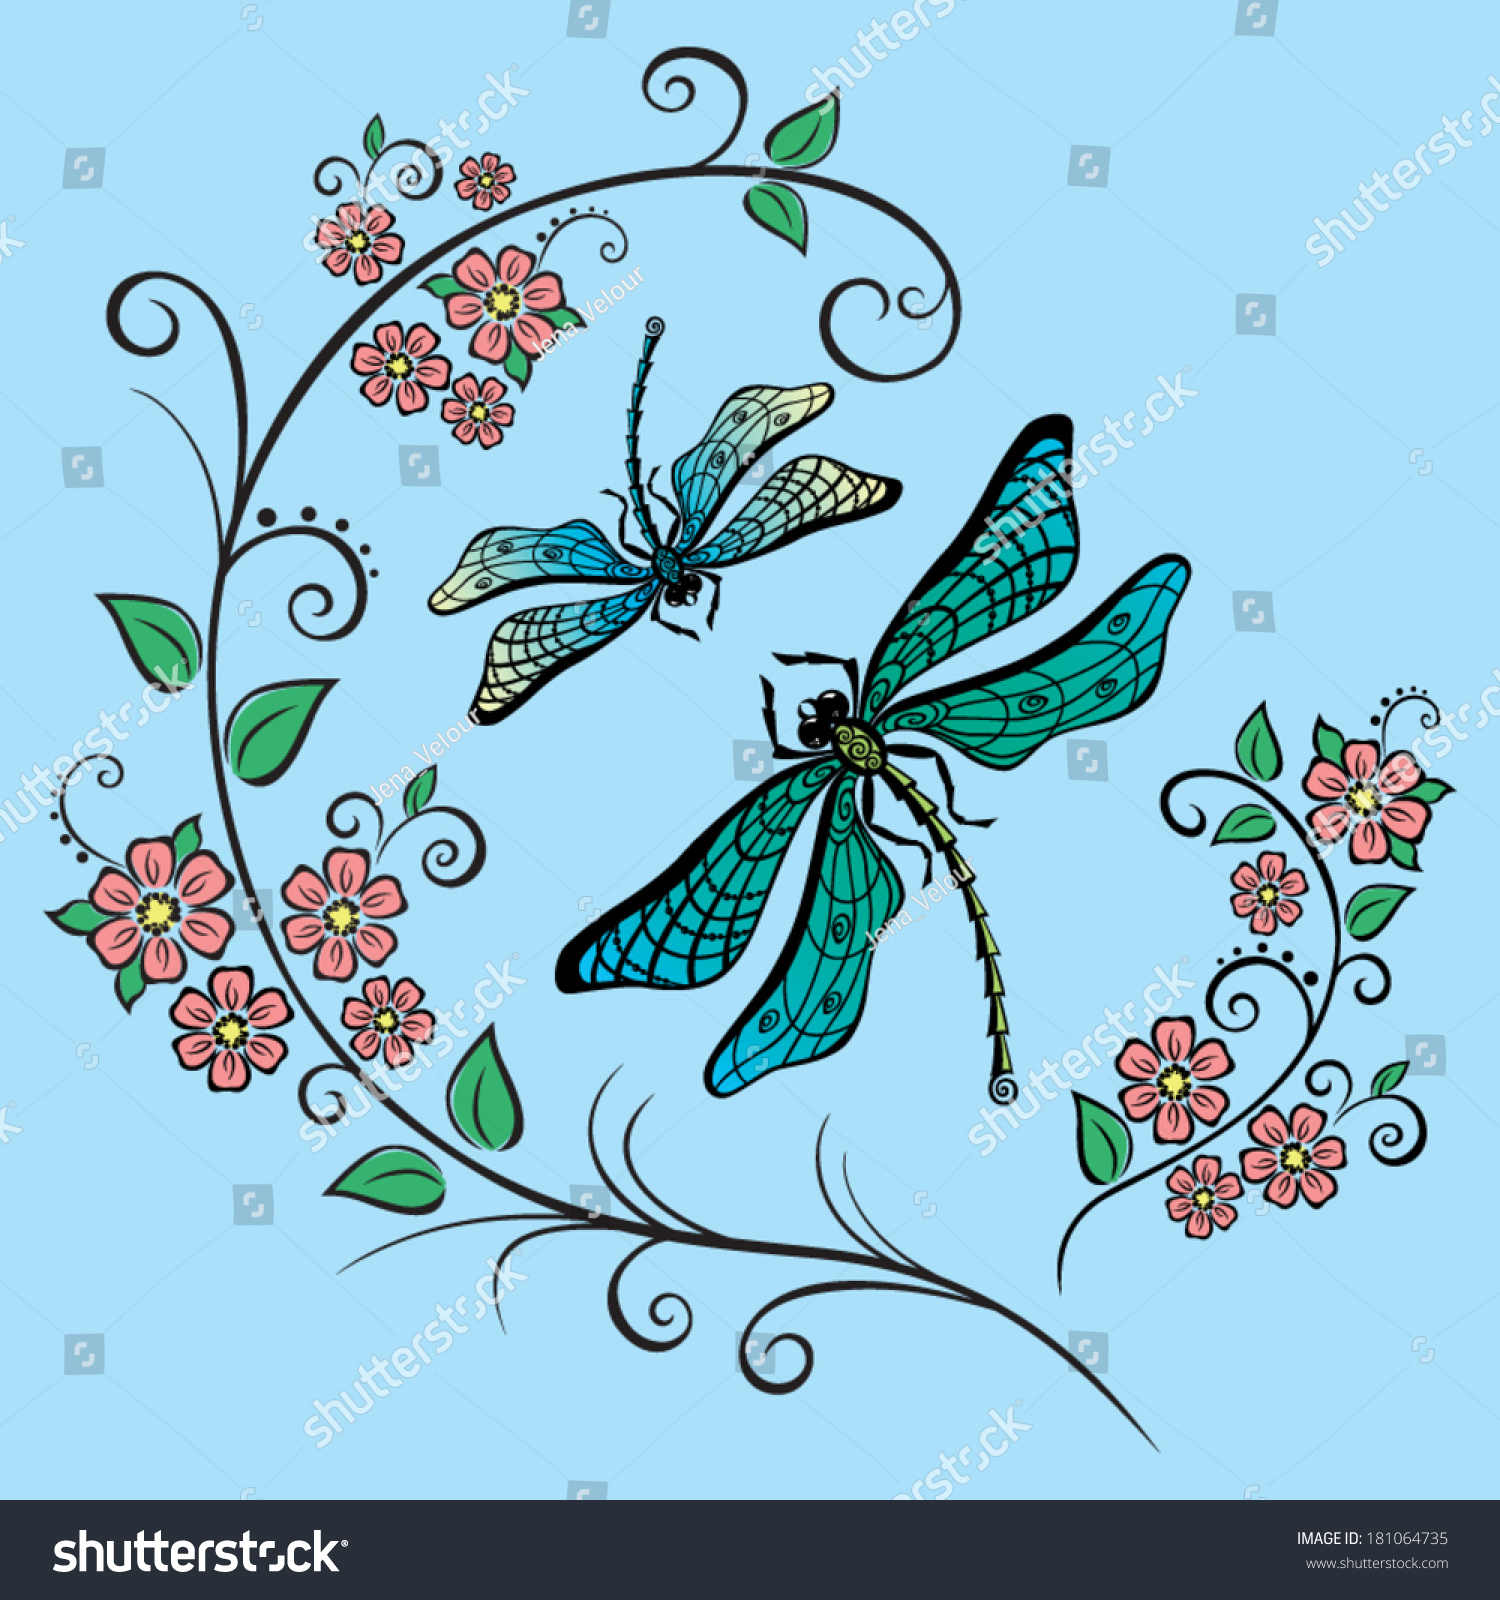 Vector Illustration With Flowers And Dragonflies - 181064735 : Shutterstock